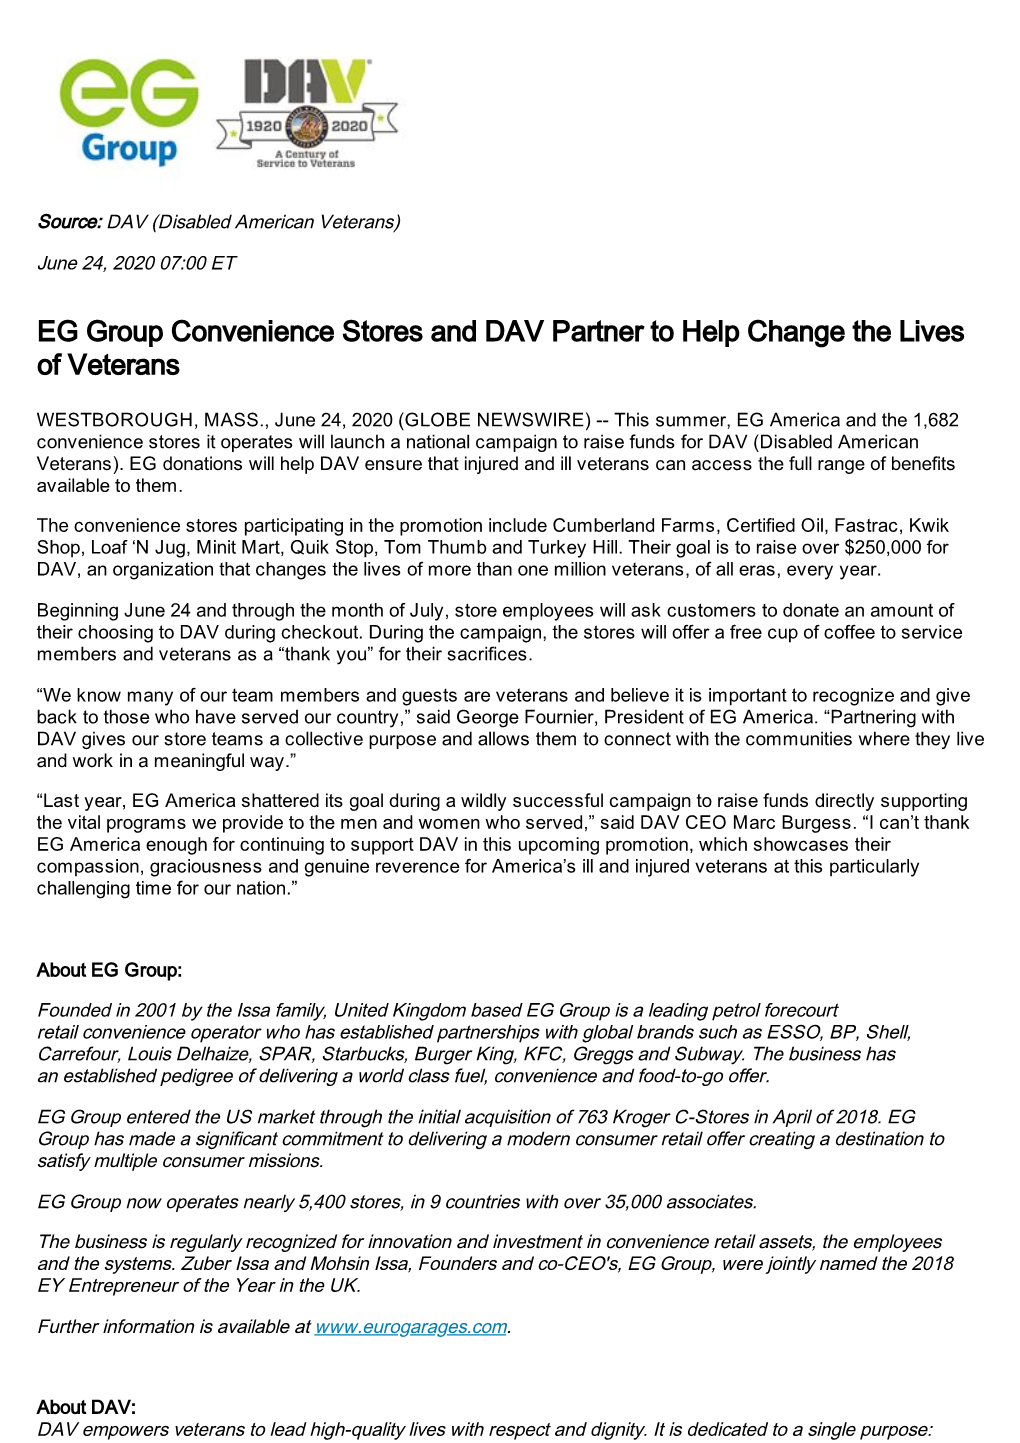 EG Group Convenience Stores and DAV Partner to Help Change the Lives of Veterans